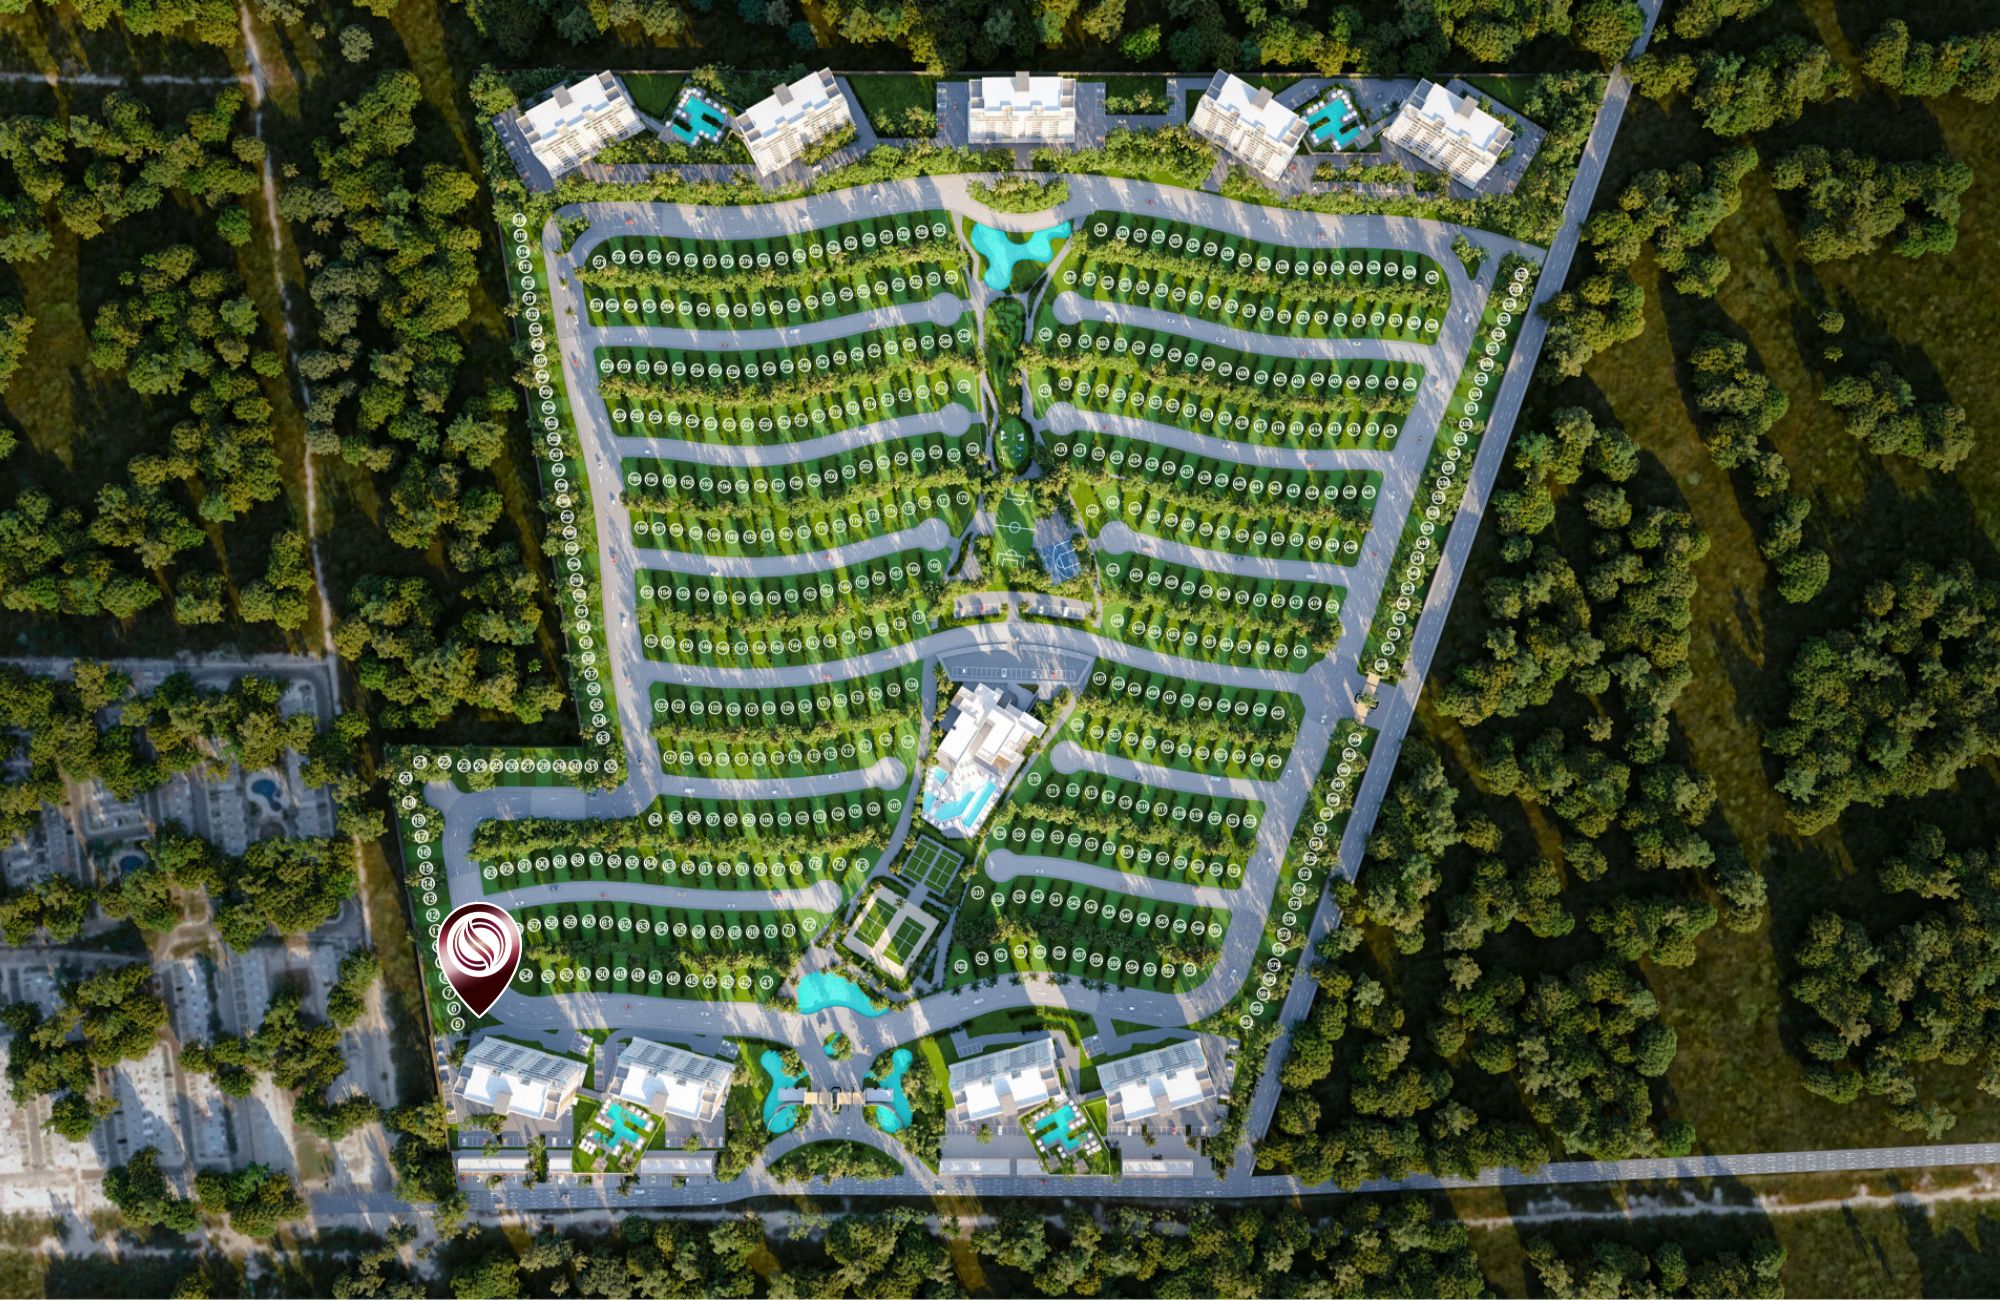 Residential lot in gated community Valenia, 250 meters from the clubhouse, with amenities, already deeded for sale in Playa del Carmen.